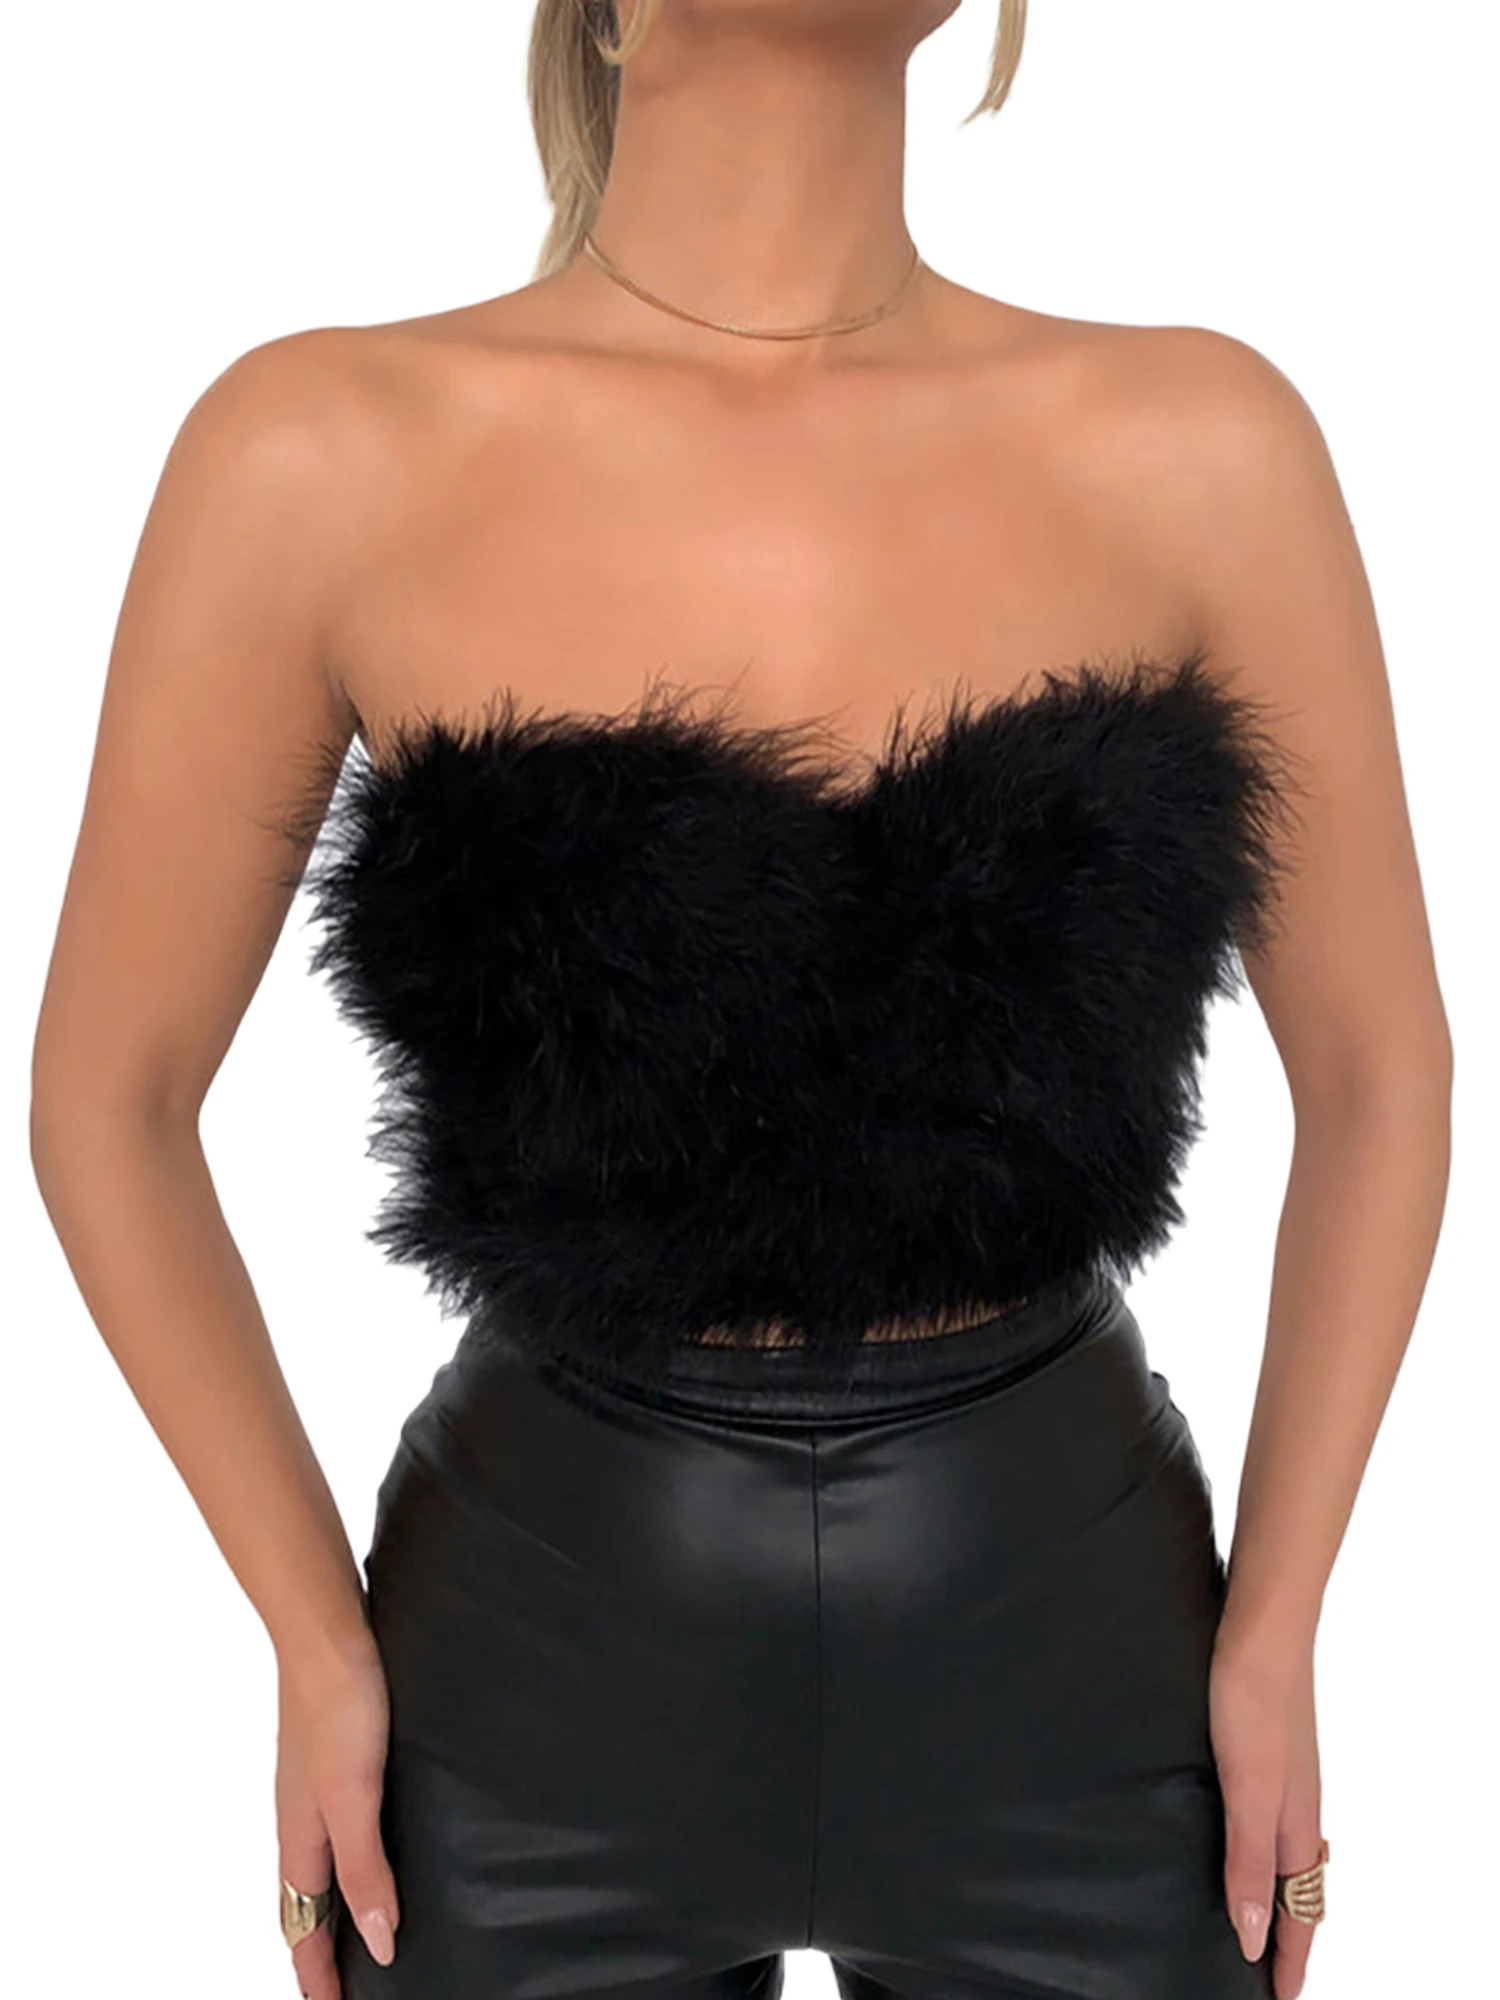 wsevypo Feathers Crop Tops Elegant Vintage Furry Faux Fur Tube Tops Women Strapless Tank Tops Solid Color Backless Bandana Vest